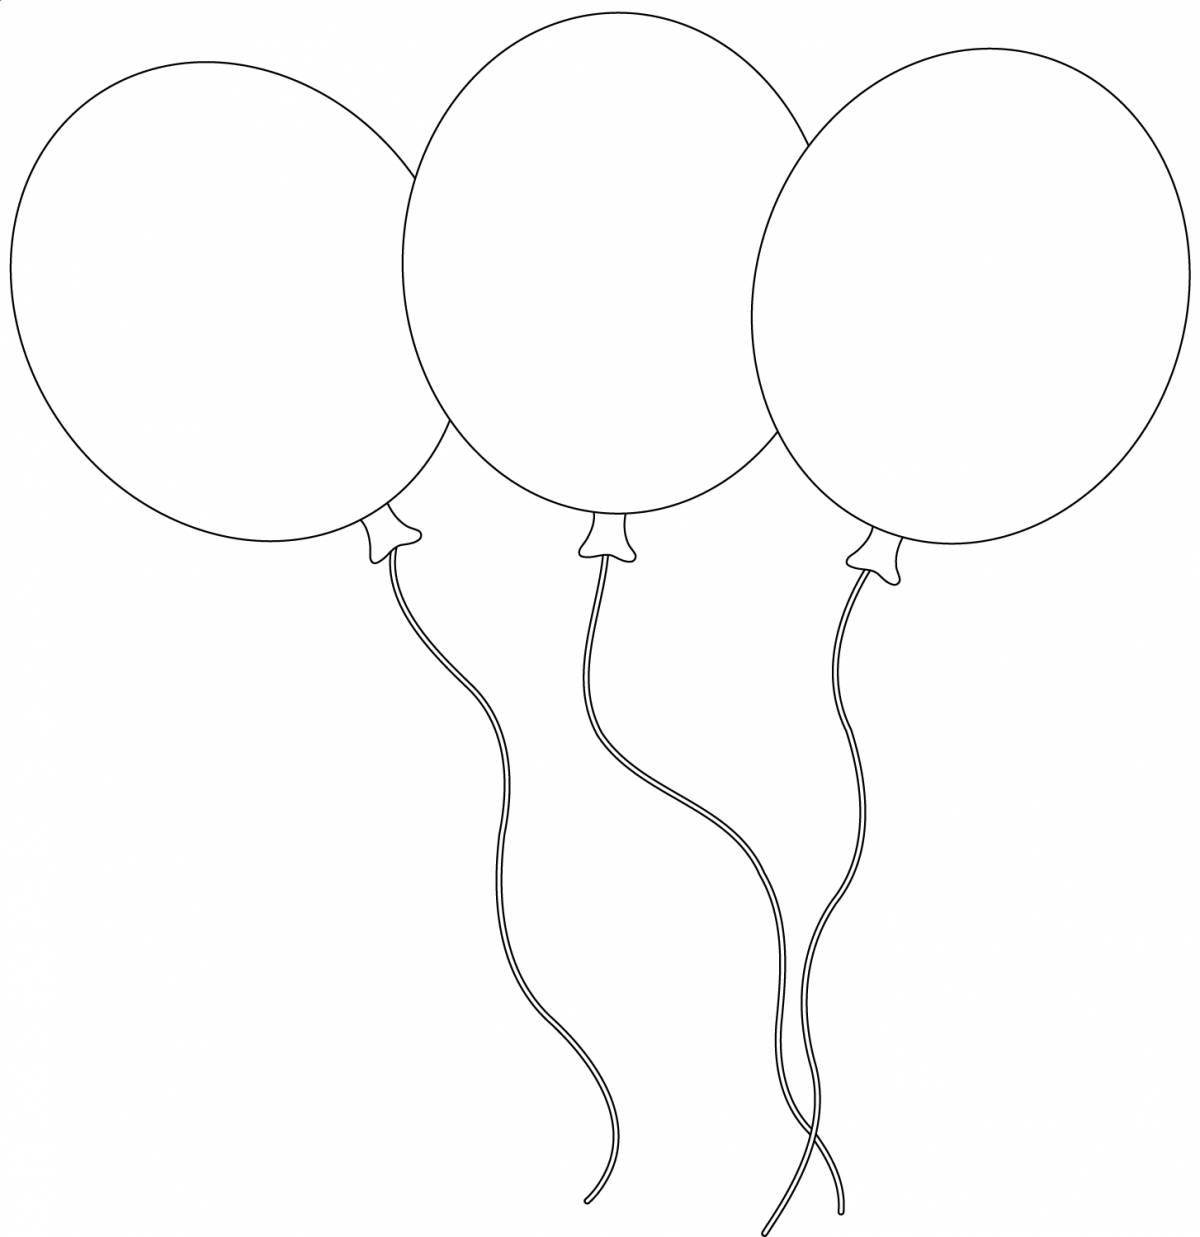 Awesome balloon coloring pages for 2-3 year olds